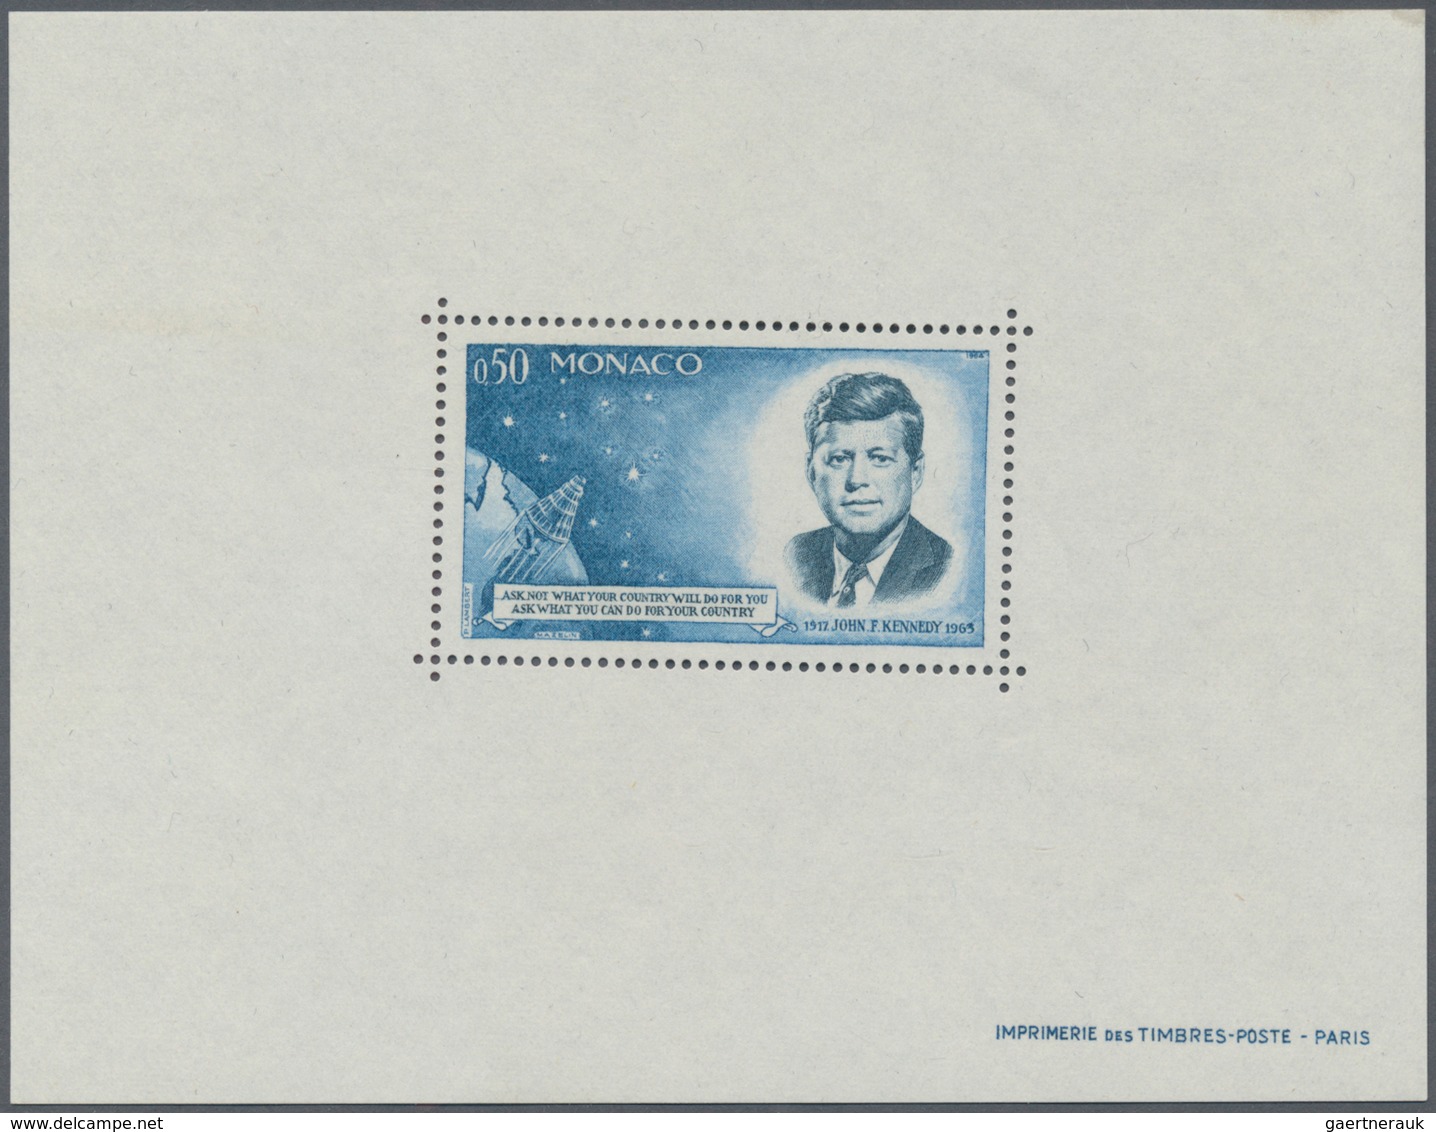 Monaco: 1964, J. F. Kennedy And Mercury Capsule, SPECIAL SOUVENIR SHEET Perforated, Three Copies Min - Neufs